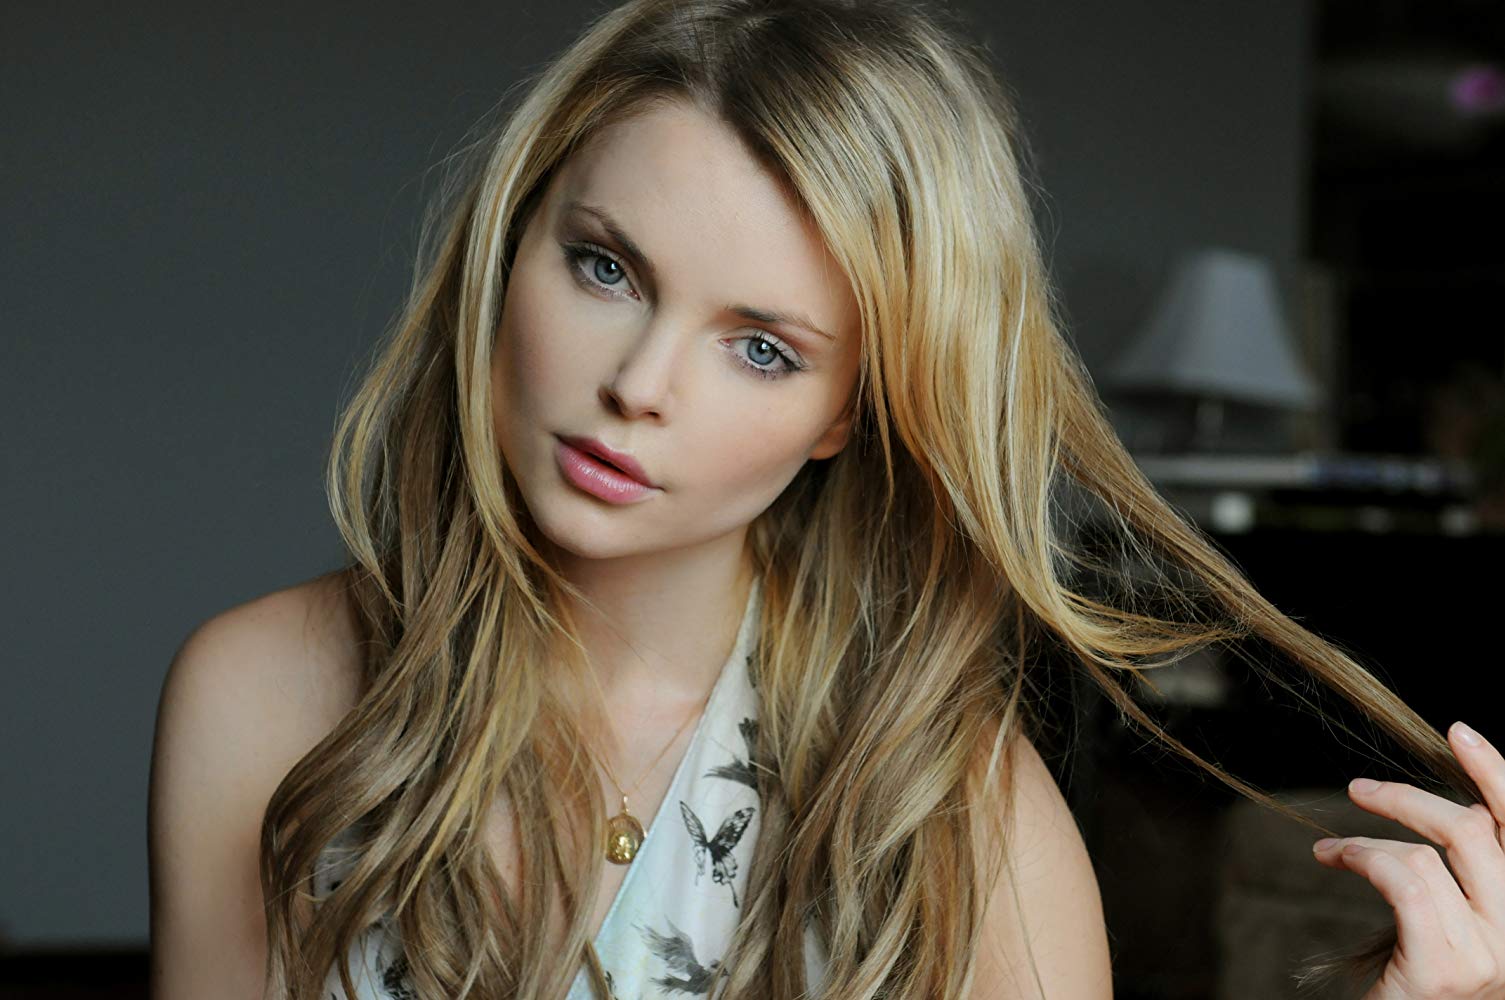 Dating izabella miko Who is